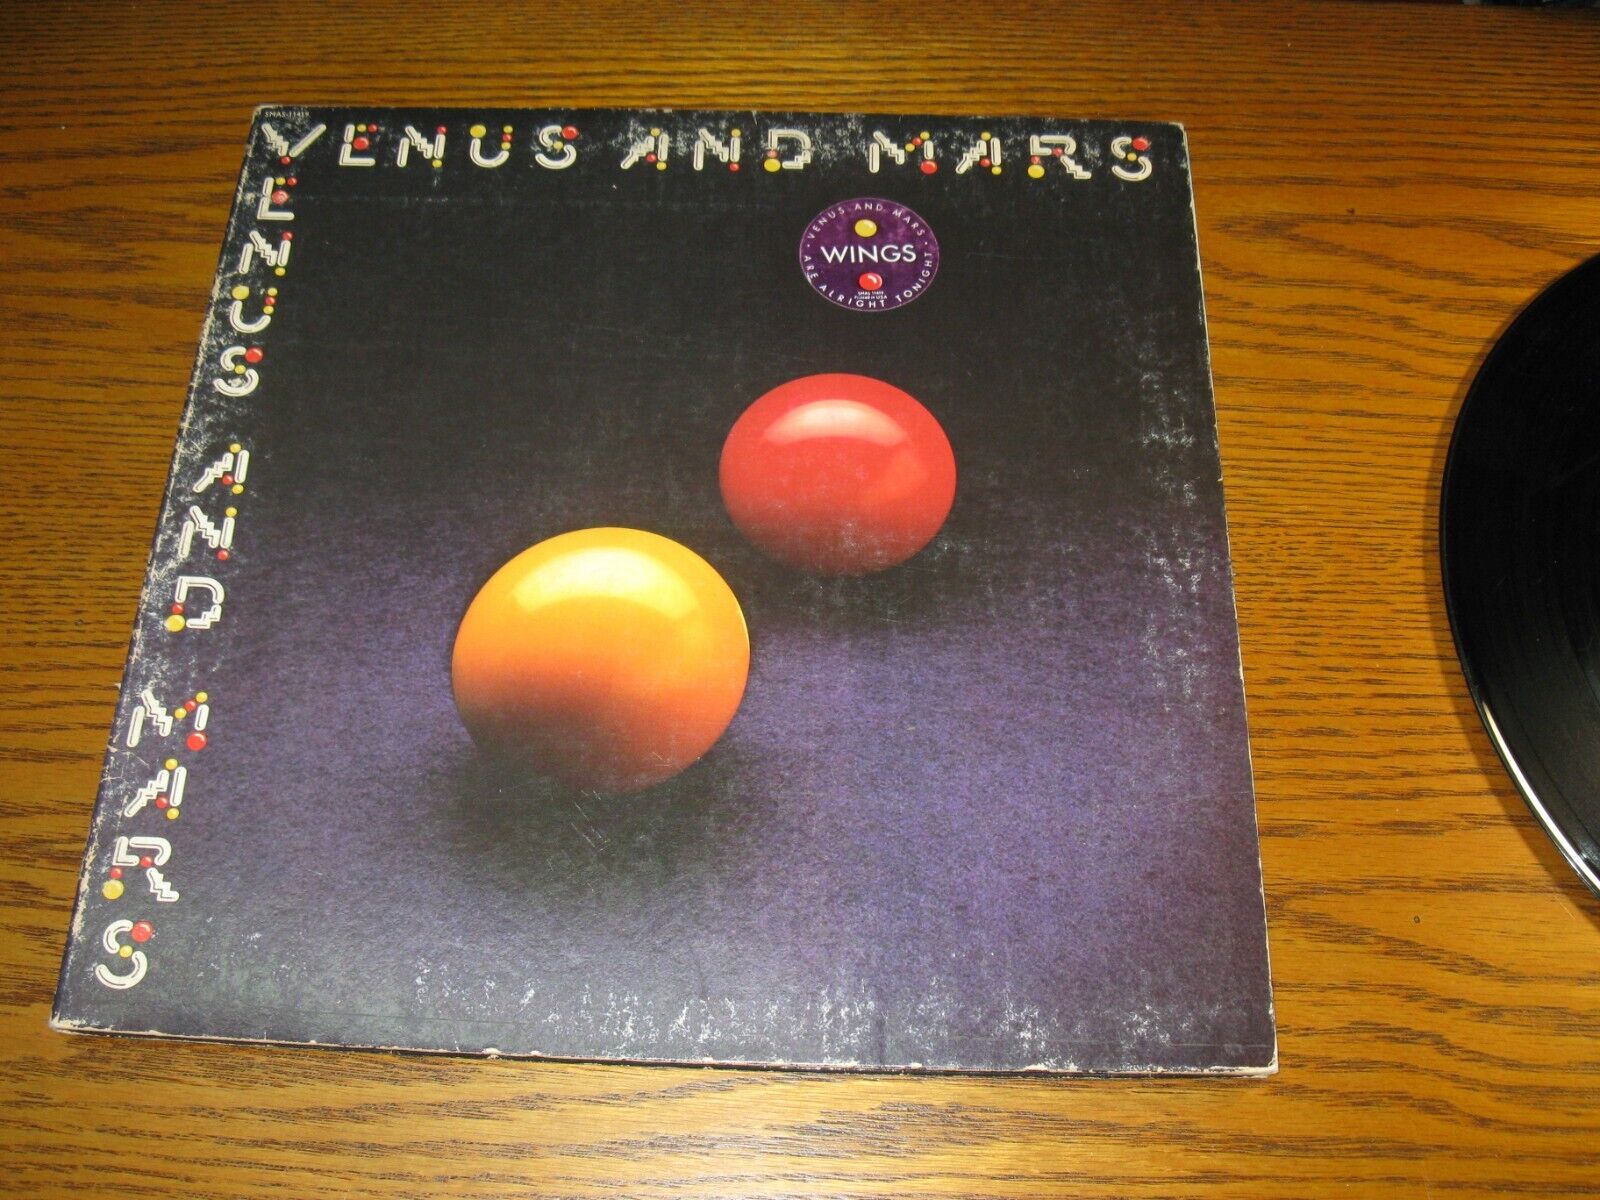 vinyl - The Wings - Venus and Mars - ultrasonically cleaned - new outer sleeve -